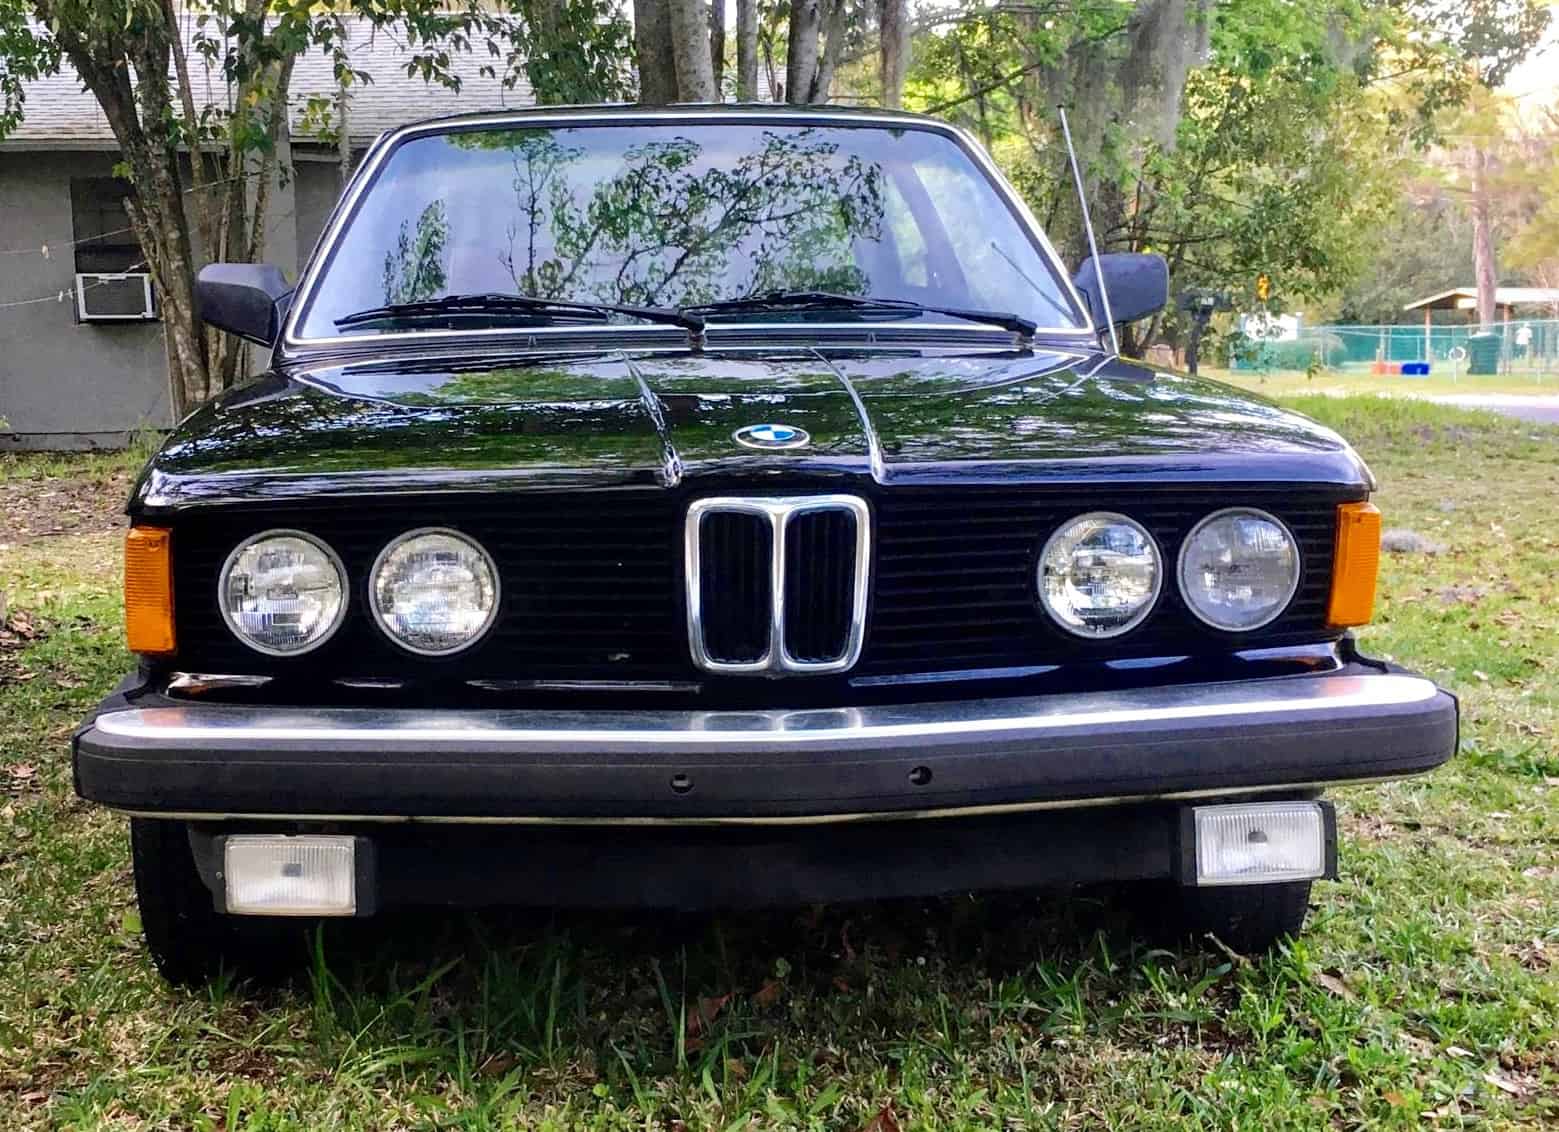 BMW 320i, Pick of the Day is 3-owner BMW 320i, ClassicCars.com Journal